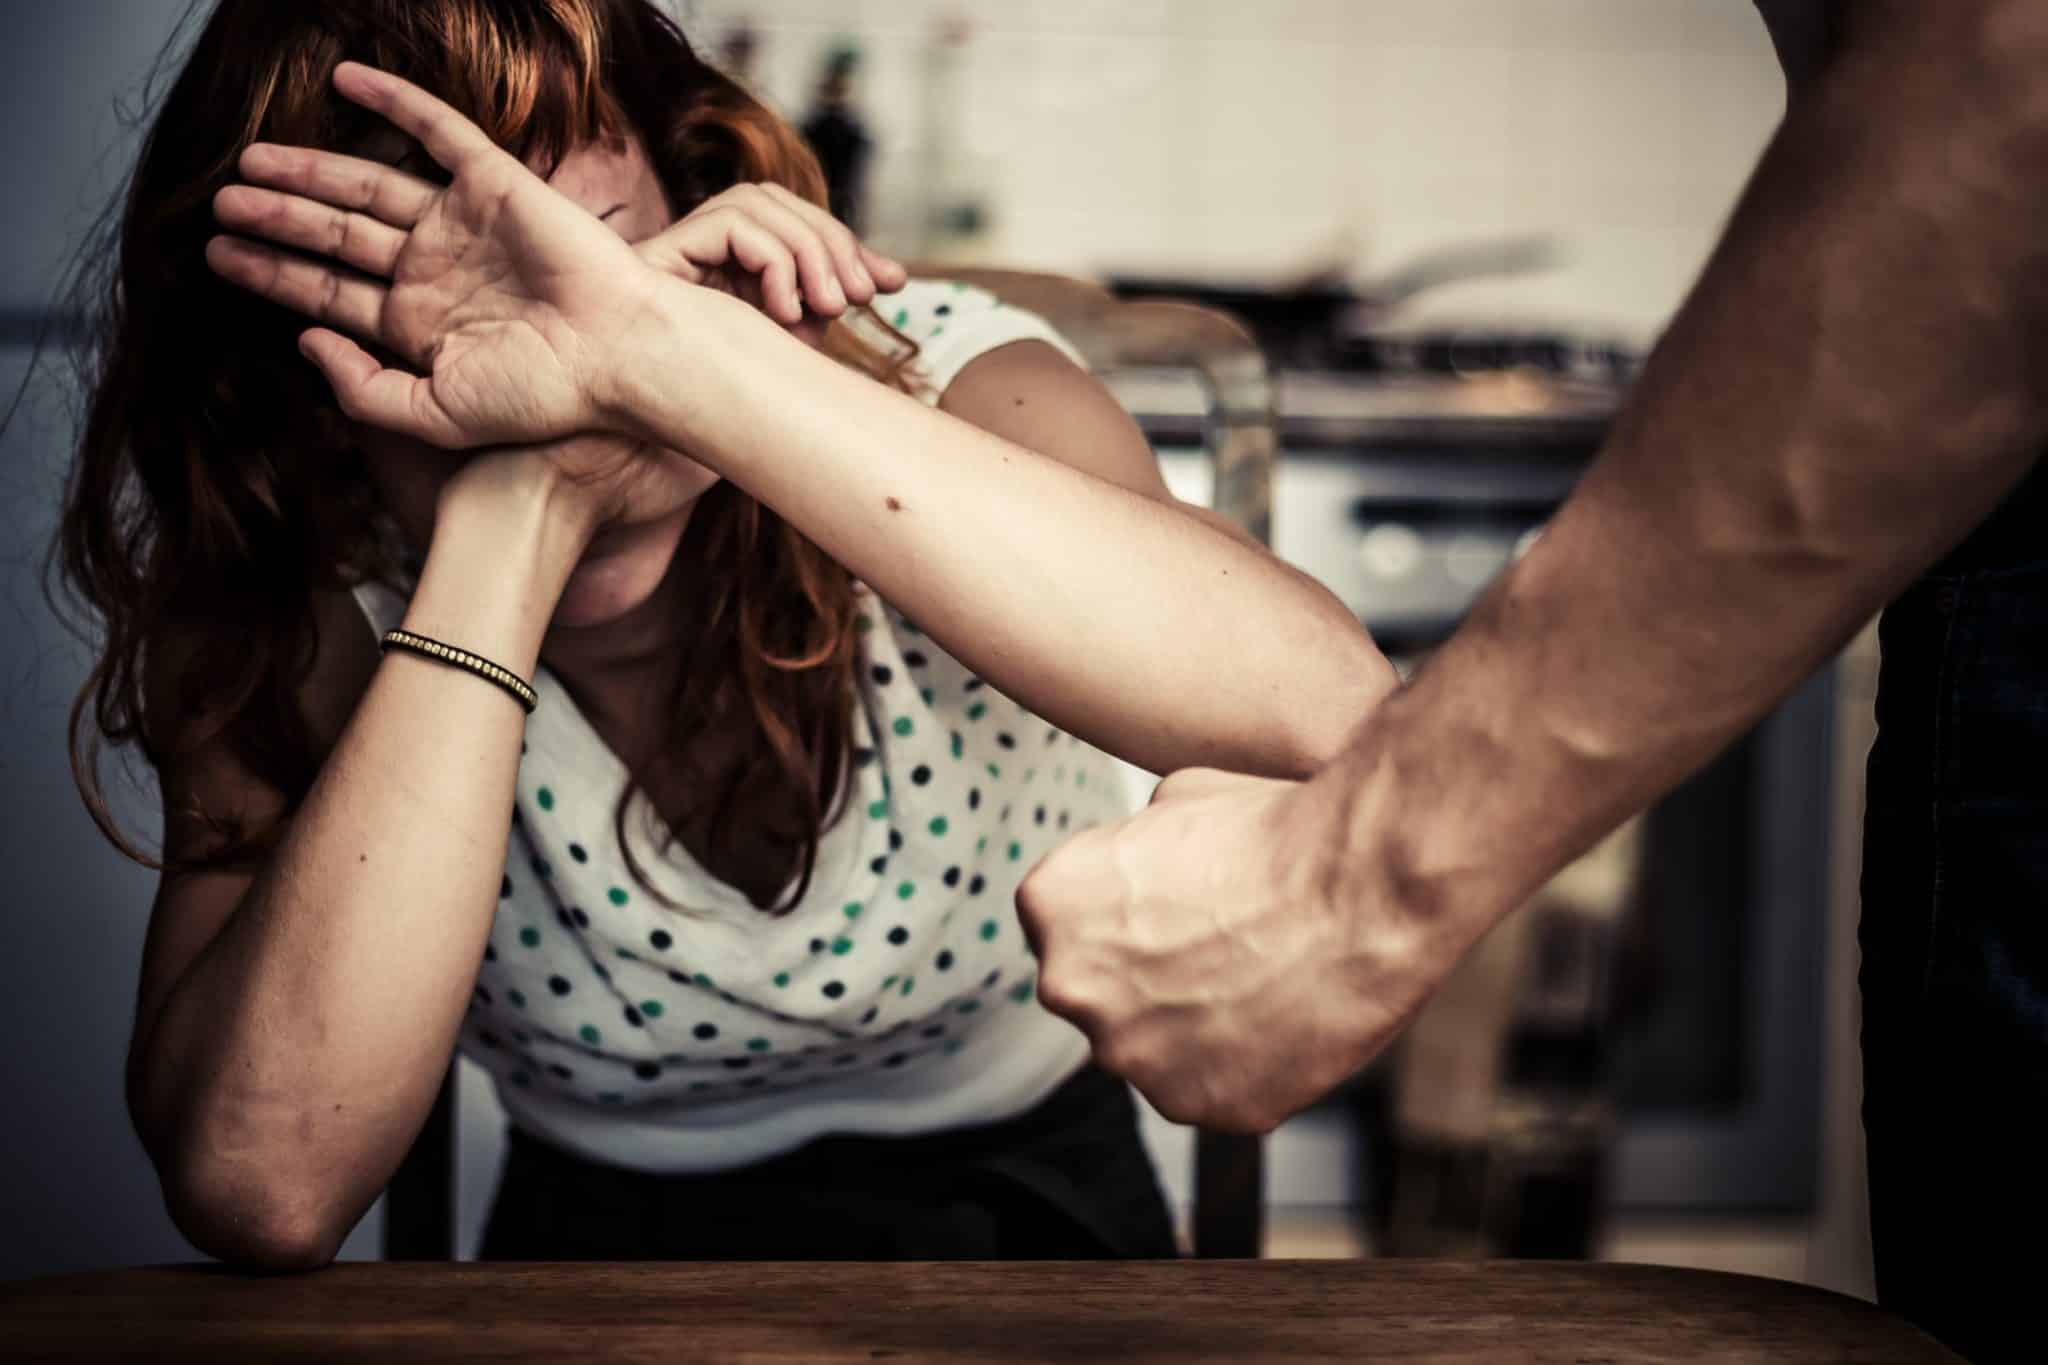 Illinois Domestic Abuse Laws Defined